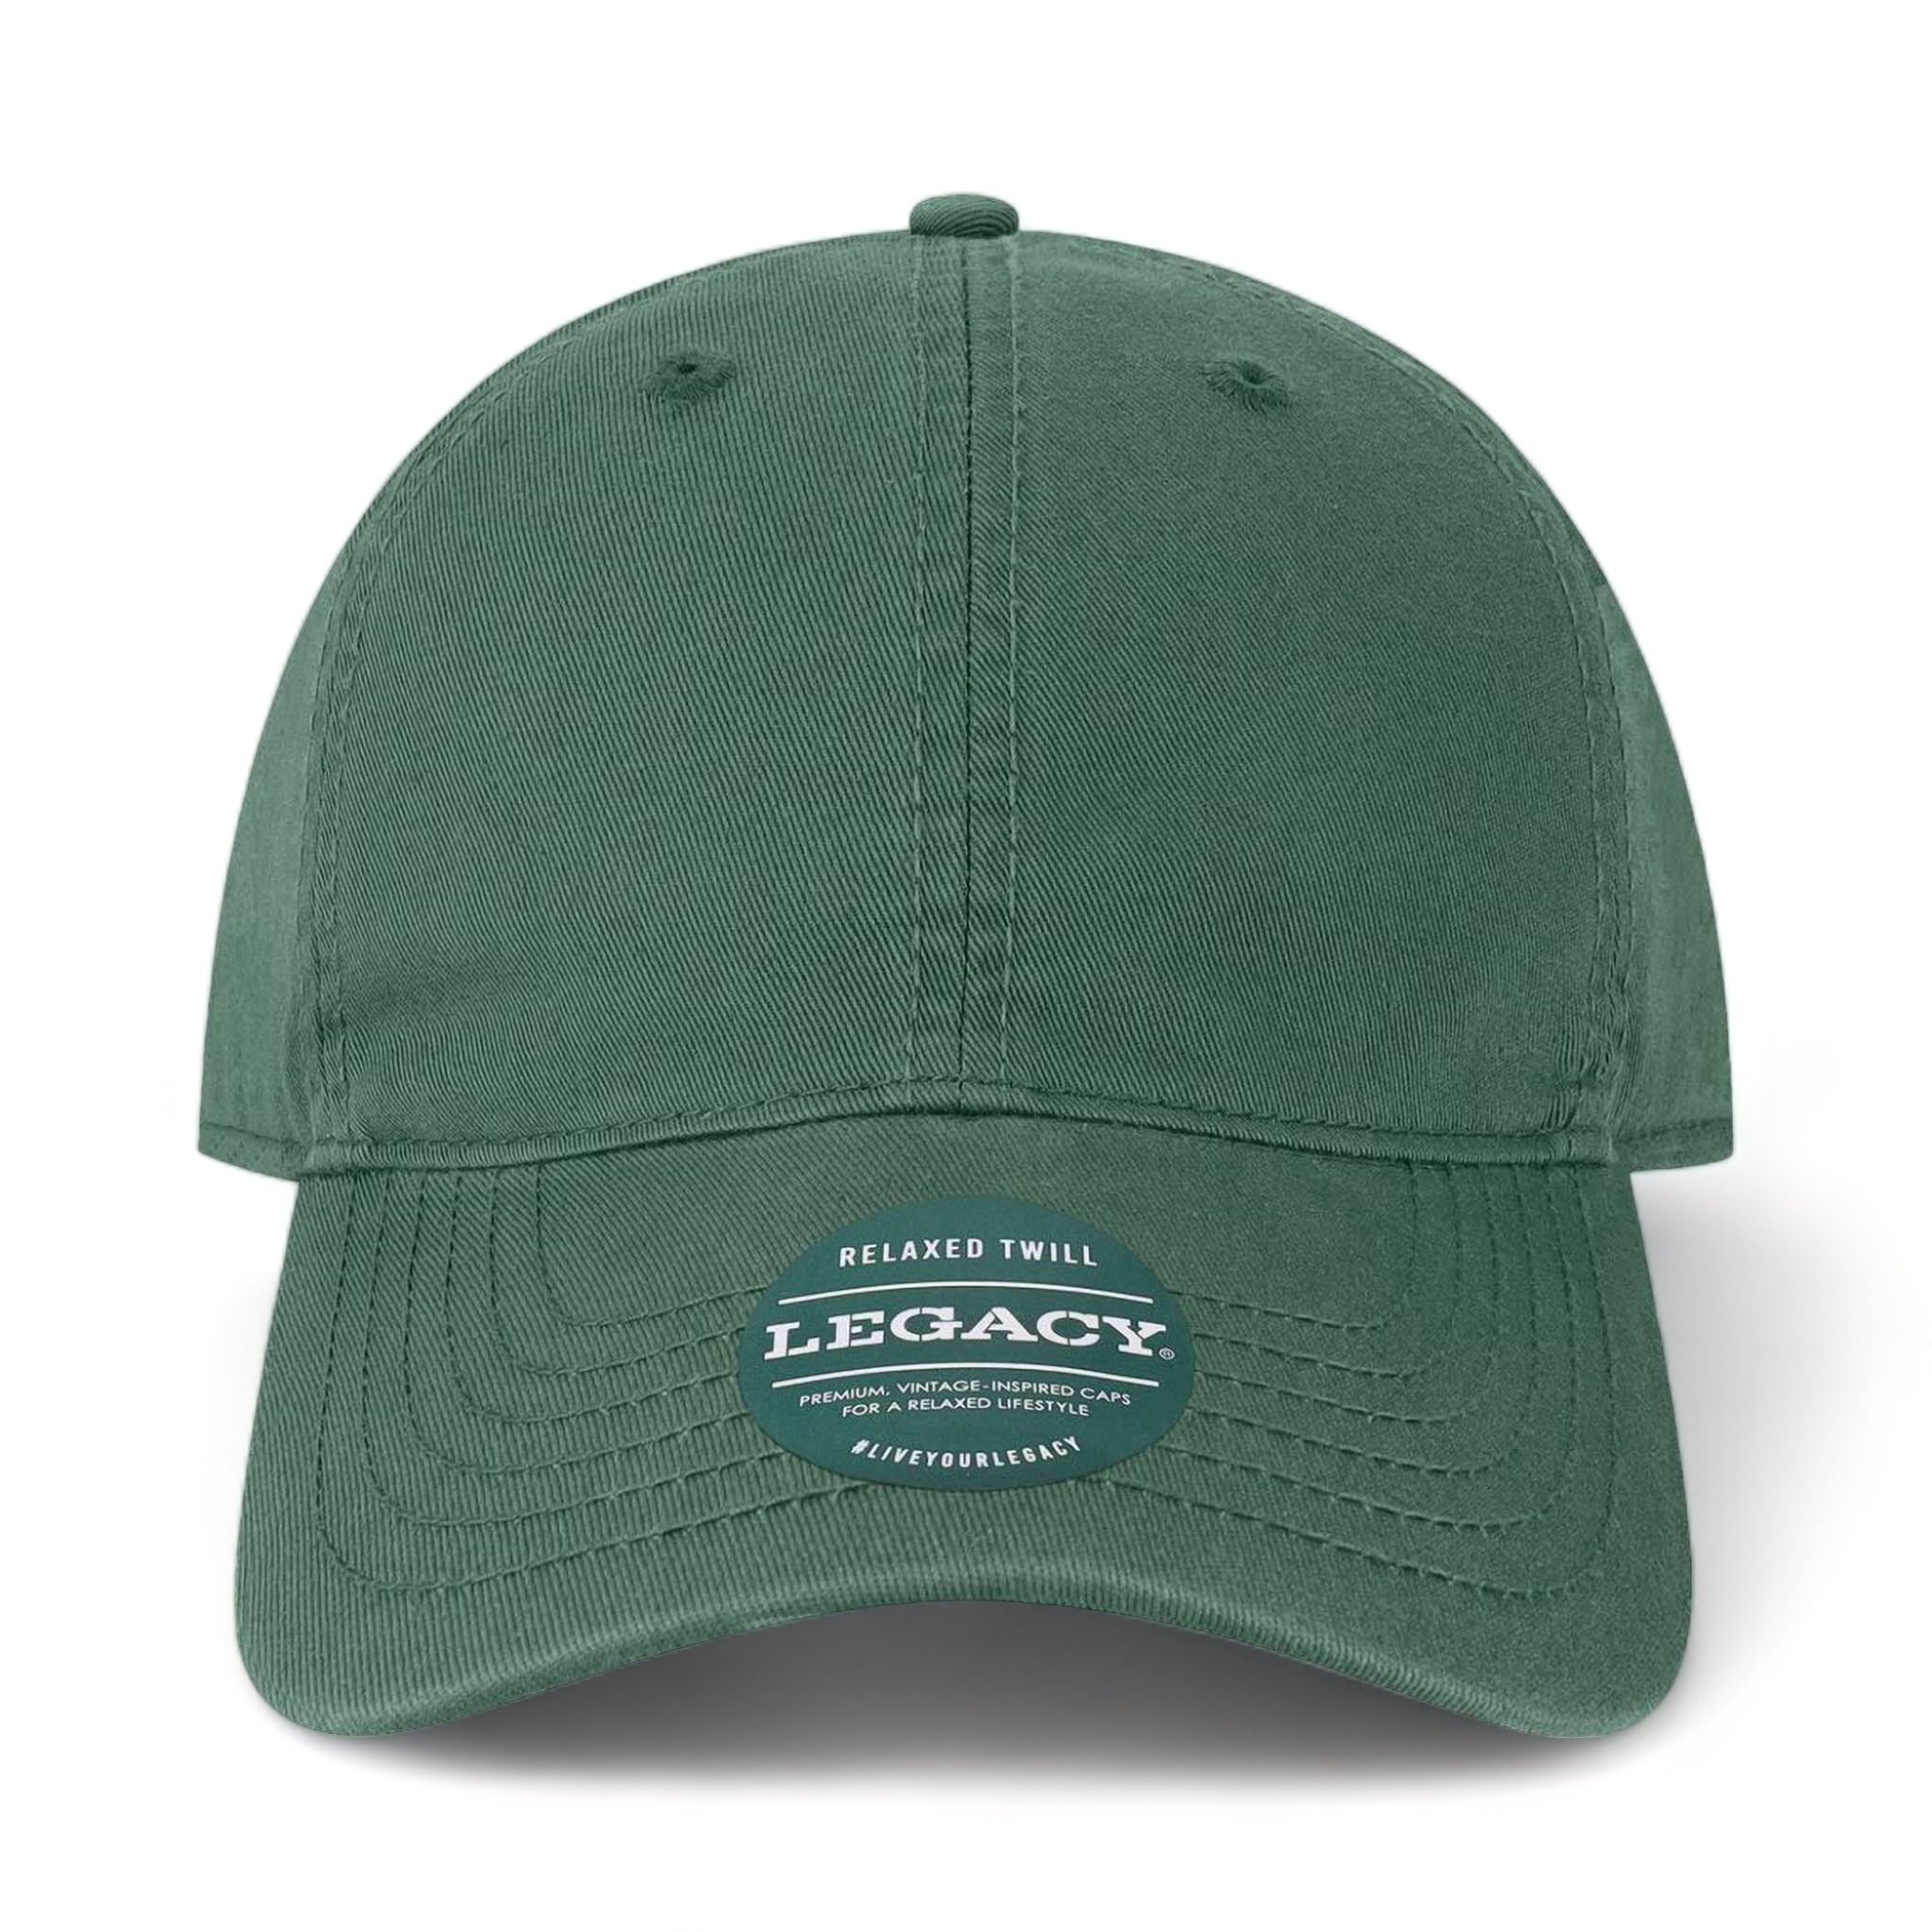 Front view of LEGACY EZA custom hat in spruce green